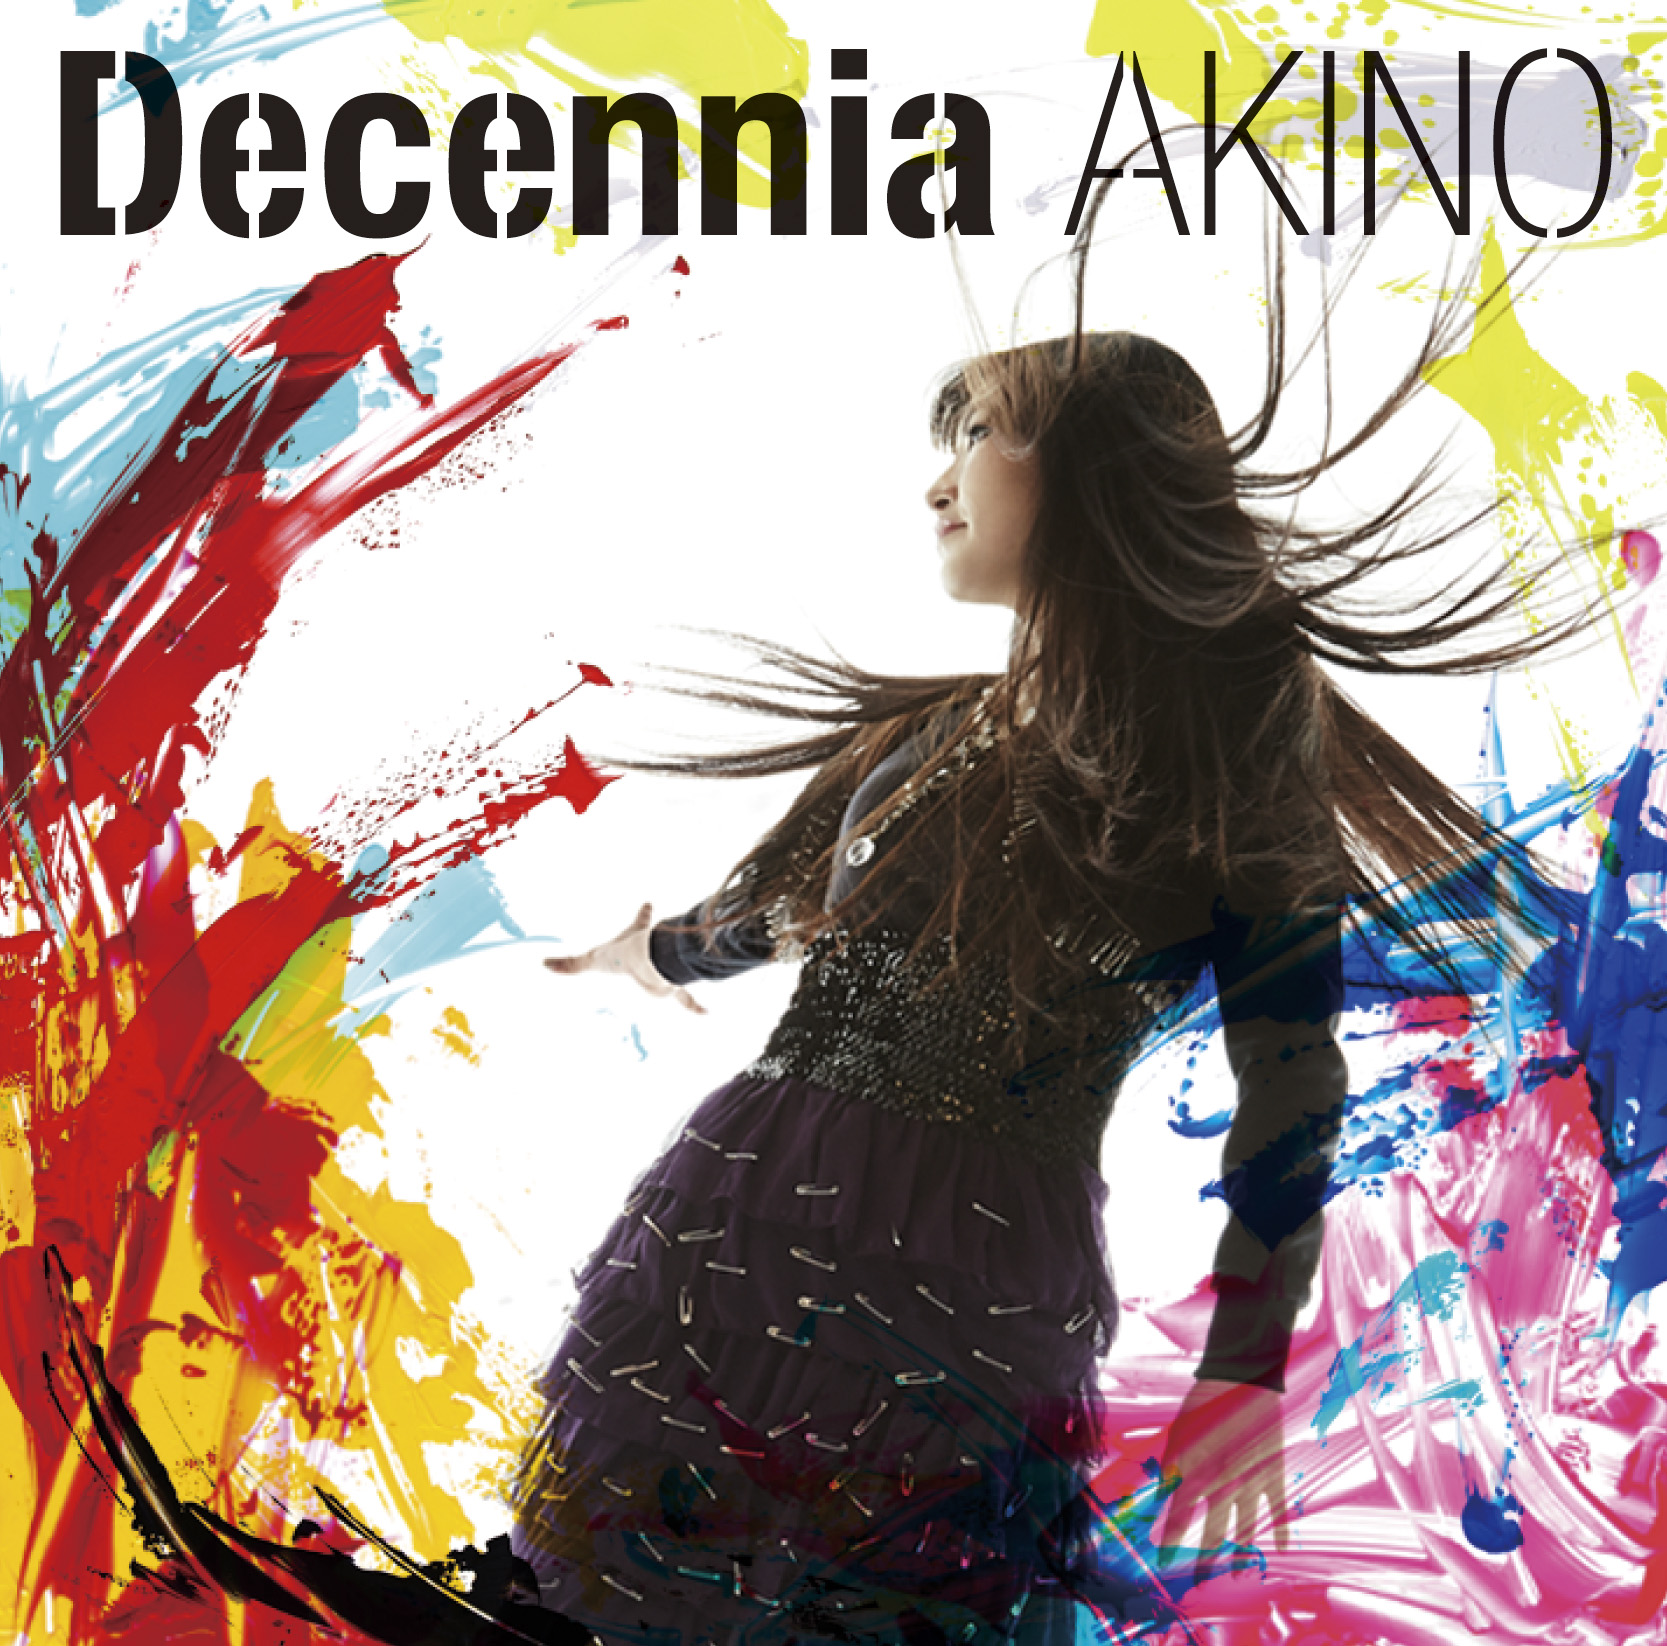 AKINO with bless4『Decennia』レビュー - 画像一覧（1/2）